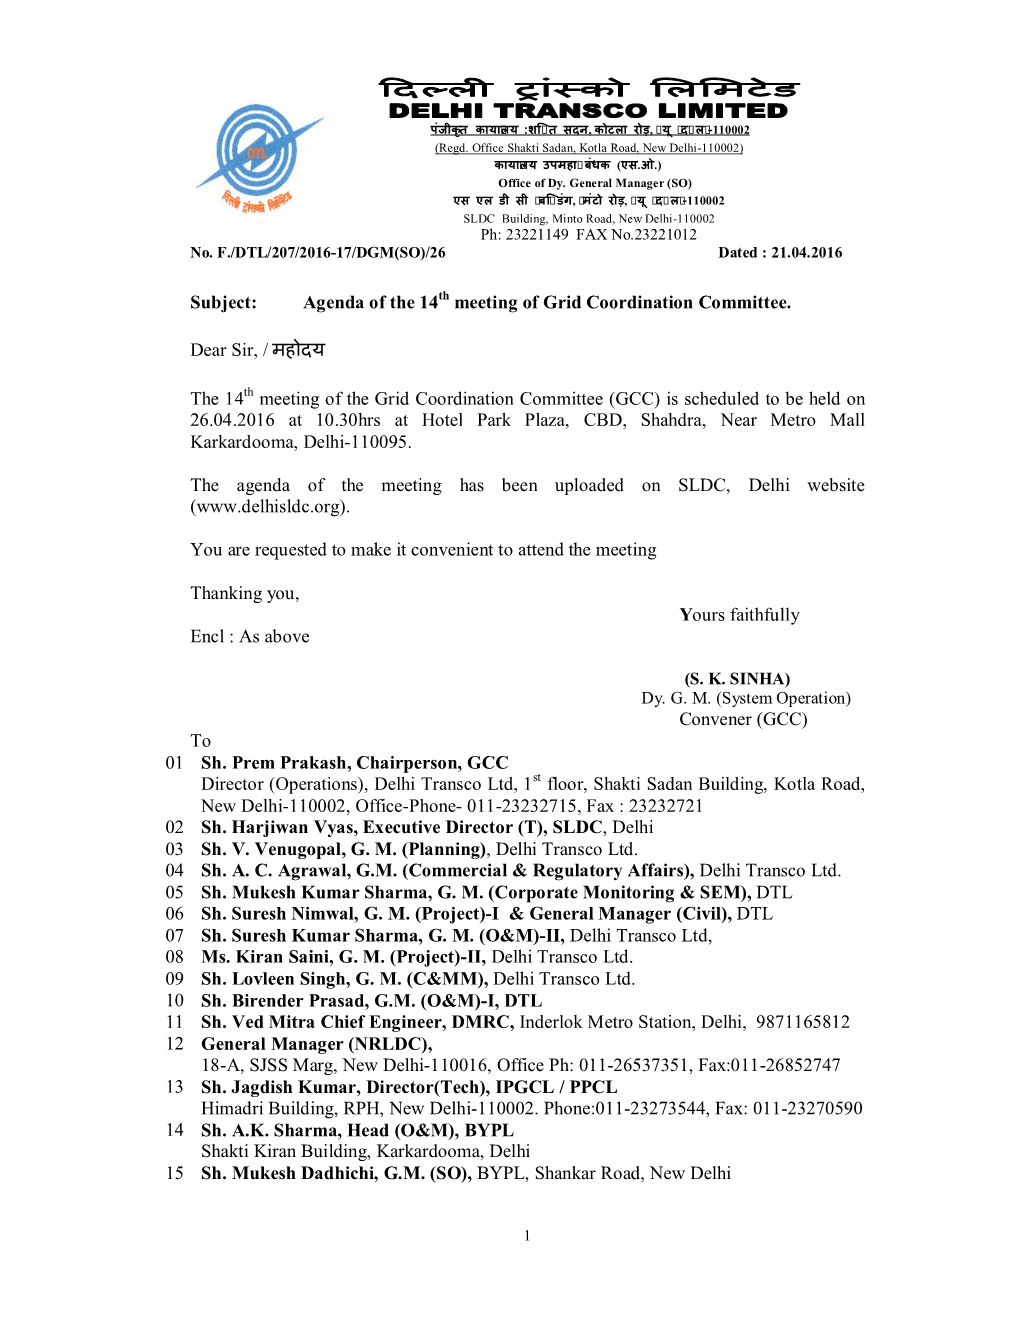 Subject: Agenda of the 14Th Meeting of Grid Coordination Committee